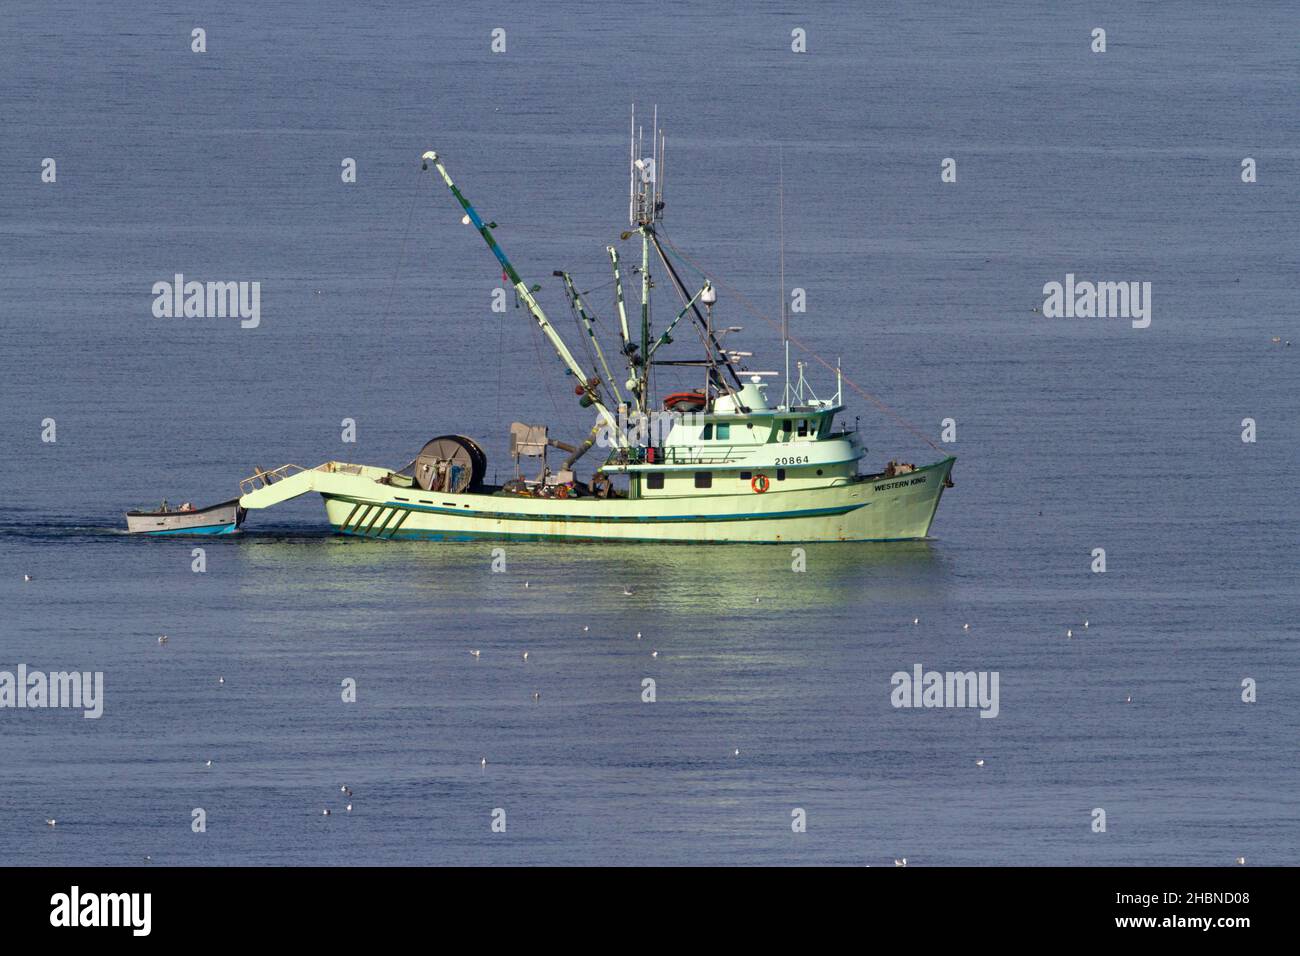 Fishing boat fishing for pacific herring in Strait of Georgia (Salish Sea) off Nanaimo coast, Vancouver Island, BC, Canada in March Stock Photo